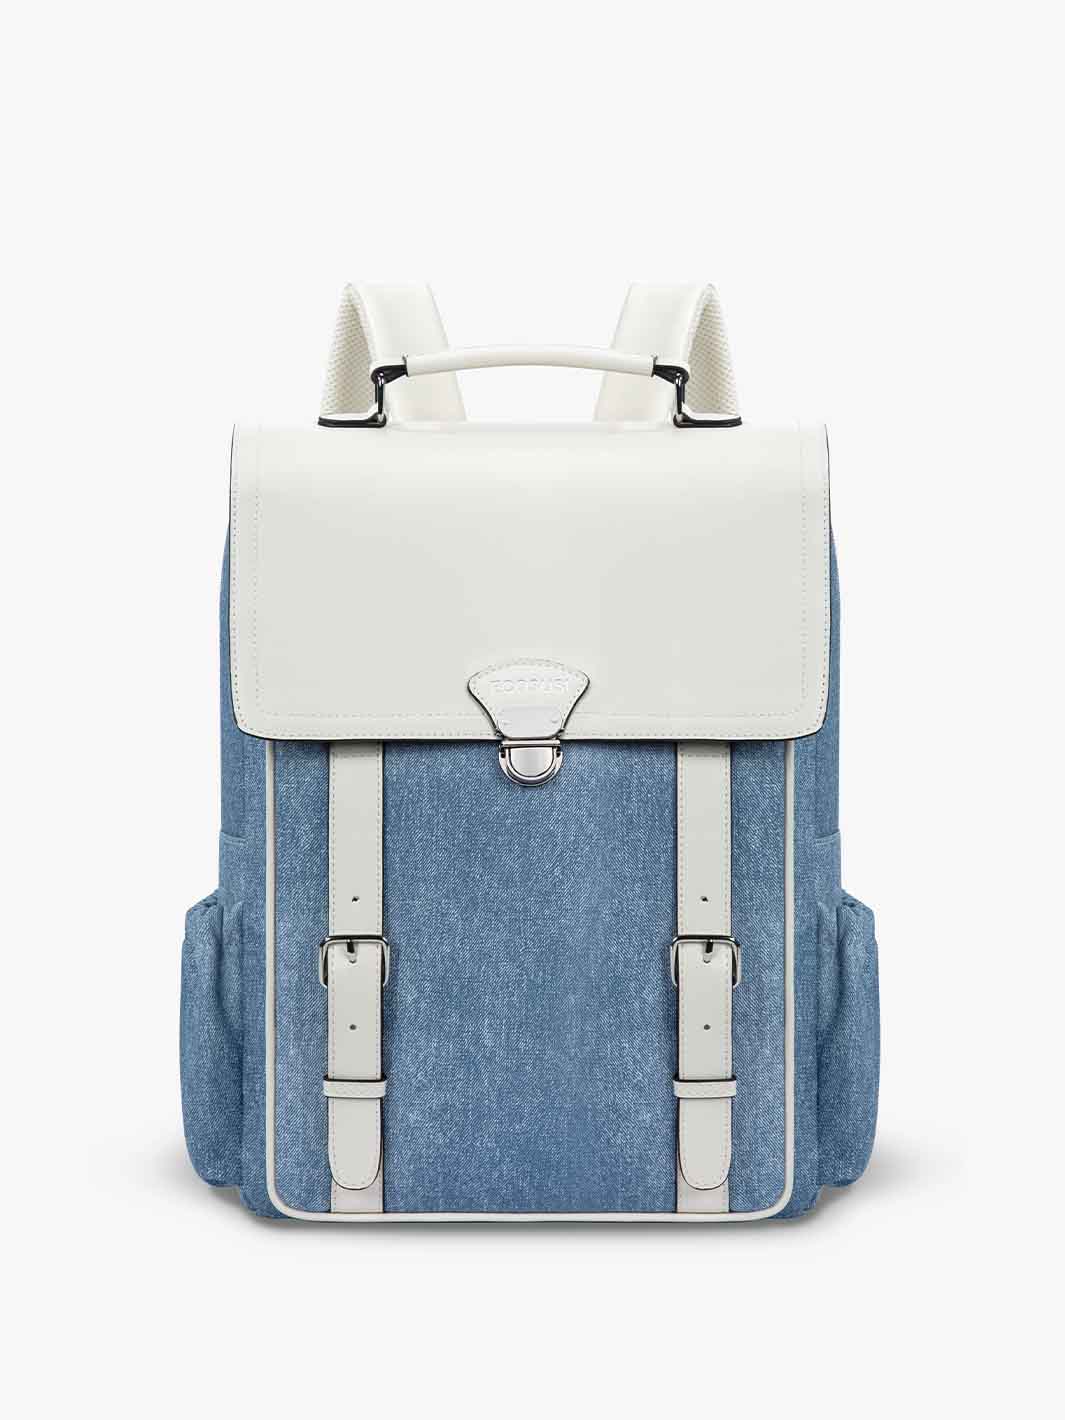 Travel Backpack For Women with Denim-Inspired PU Fabric